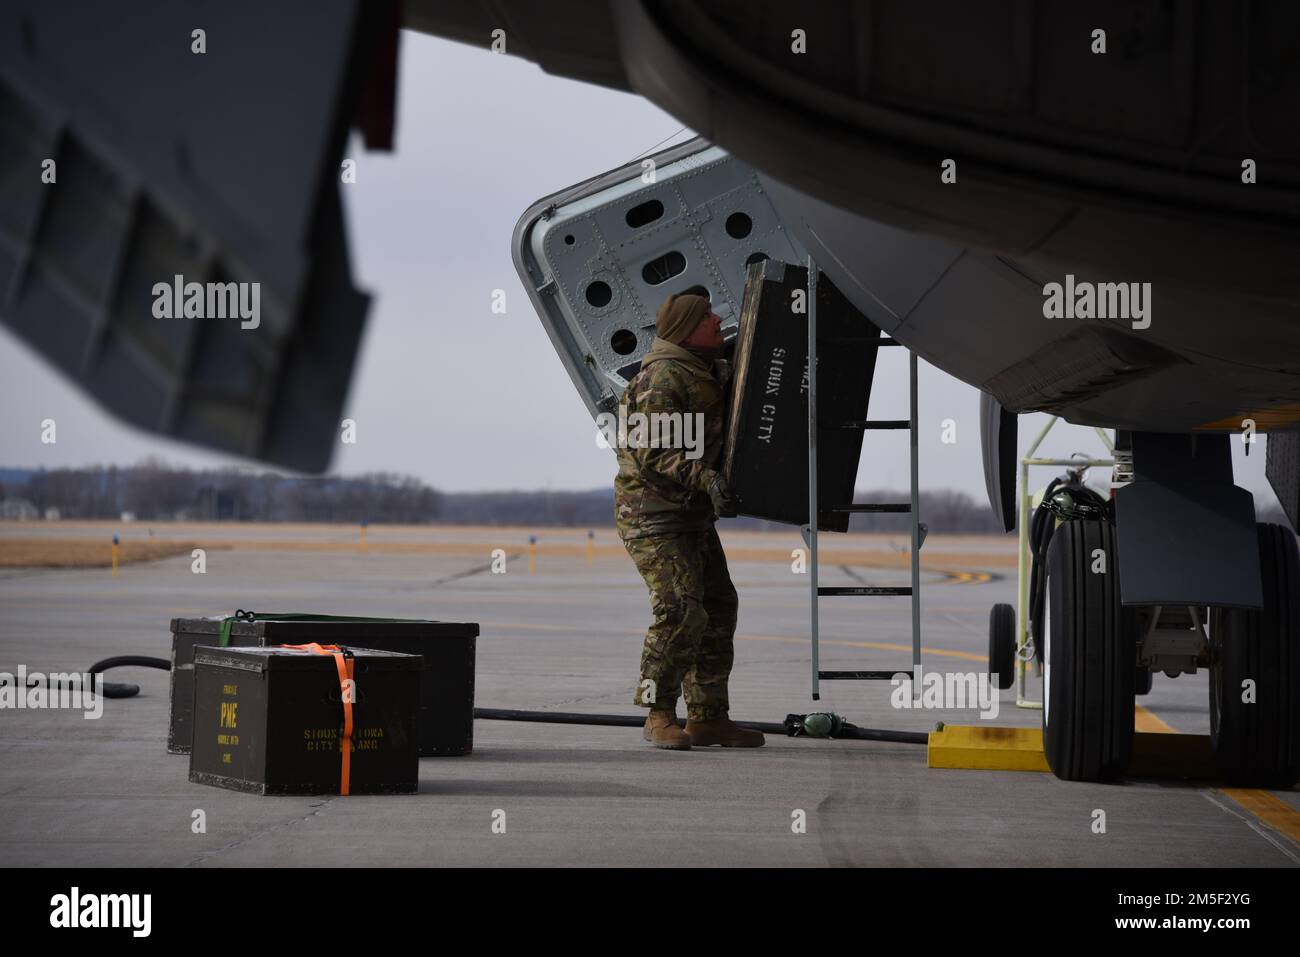 An Iowa Air National Guard Airmen loads equipment through the crew hatch of a U.S. Air Force KC-135 tail number 57-2606 at the 185th Air Refueling Wing in Sioux City, Iowa on March 10, 2022. The aircraft is being prepared for departure to the Aerospace Maintenance and Regeneration Group or AMARG at Davis-Monthon Air Force Base where it will be retired.  U.S. Air National Guard photo Senior Master Sgt. Vincent De Groot 185th ARW Wing PA Stock Photo